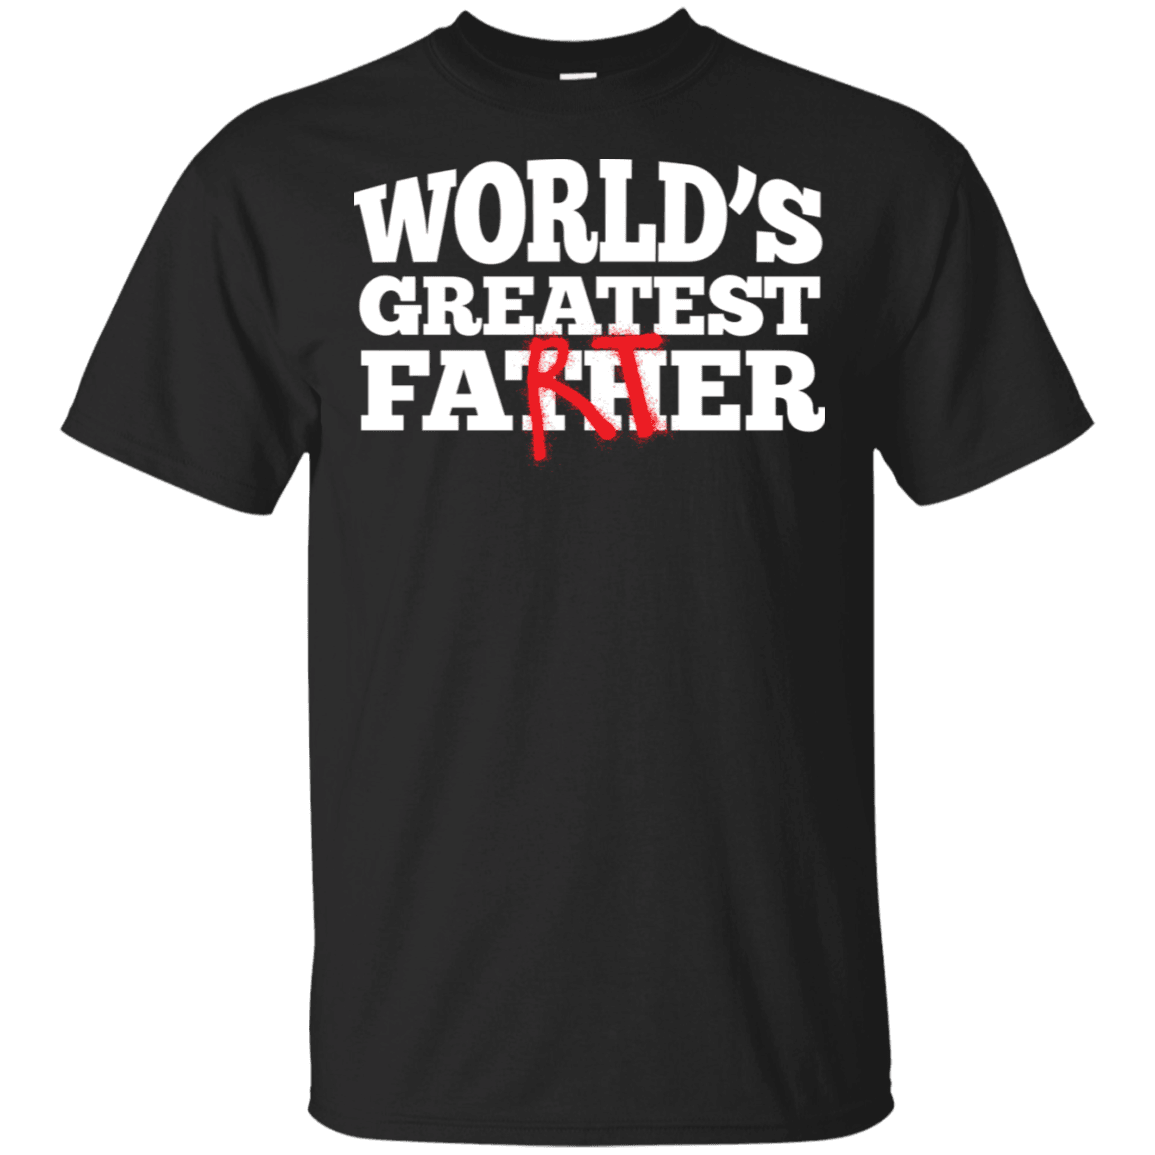 Designs by MyUtopia Shout Out:Worlds Greatest Father (Farter) Ultra Cotton Unisex T-Shirt,Black / S,Adult Unisex T-Shirt